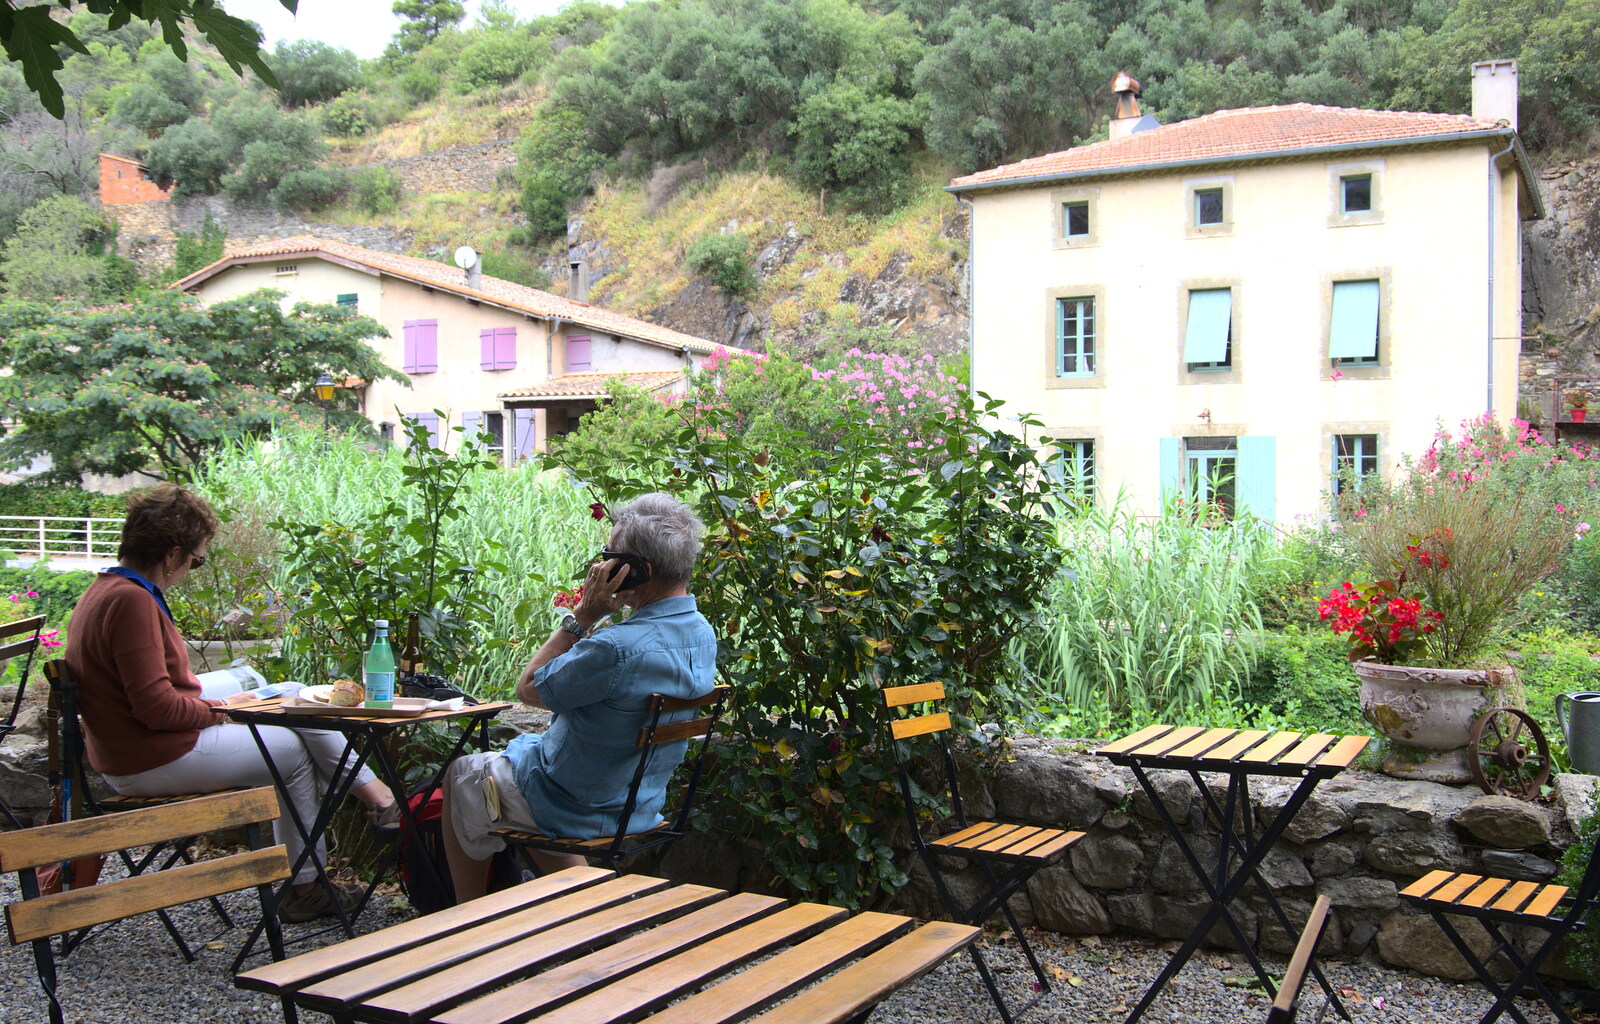 Café life from The Château Comtal, Lastours and the Journey Home, Carcassonne, Aude, France - 14th August 2018